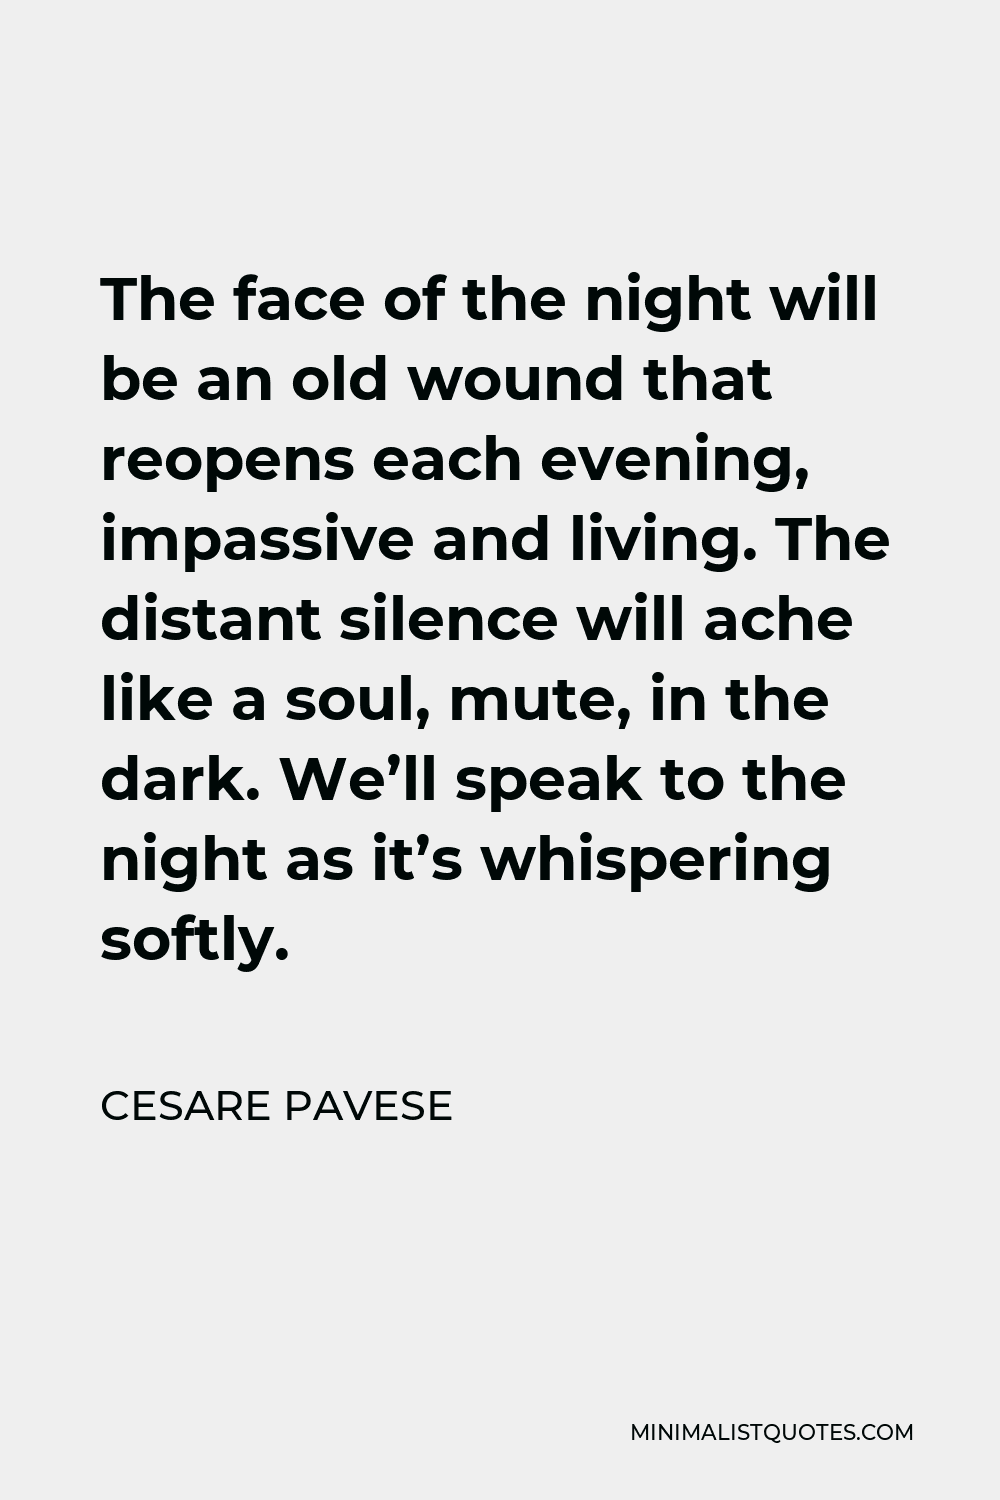 Cesare Pavese Quote - The face of the night will be an old wound that reopens each evening, impassive and living. The distant silence will ache like a soul, mute, in the dark. We’ll speak to the night as it’s whispering softly.